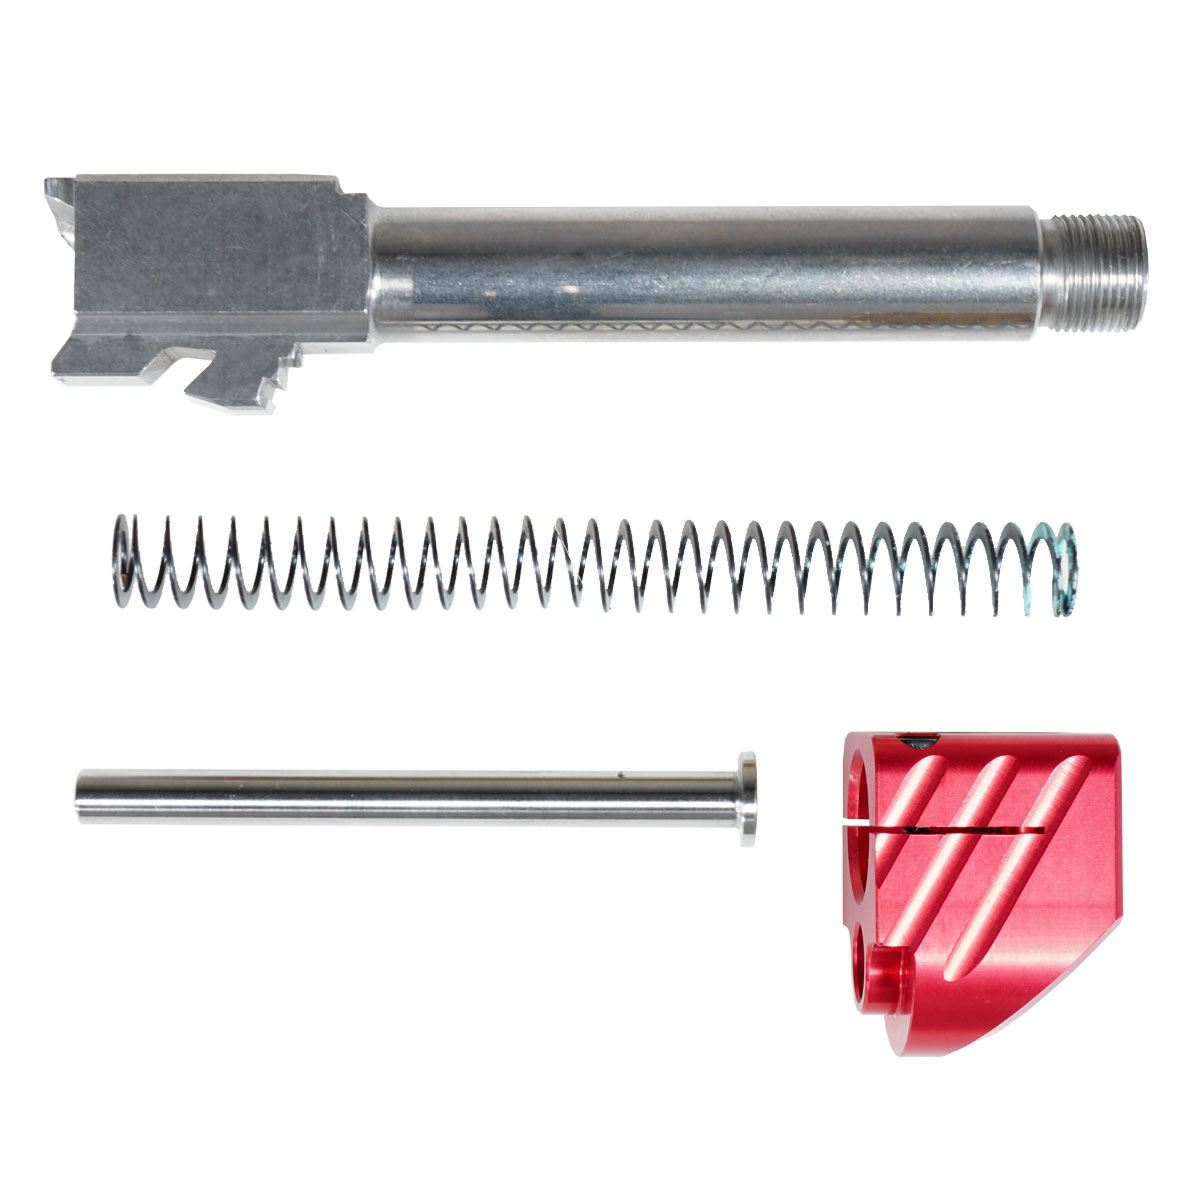 Upgrade Your Glock Kit: Mercury Precision Glock Compensator 6061 Aluminum, Anodized Type 2 Red Single port comp 1/2x28 with clamping set screws  + ELD Performance Glock 19 Compatible 9mm Stainless Steel Threaded Barrel